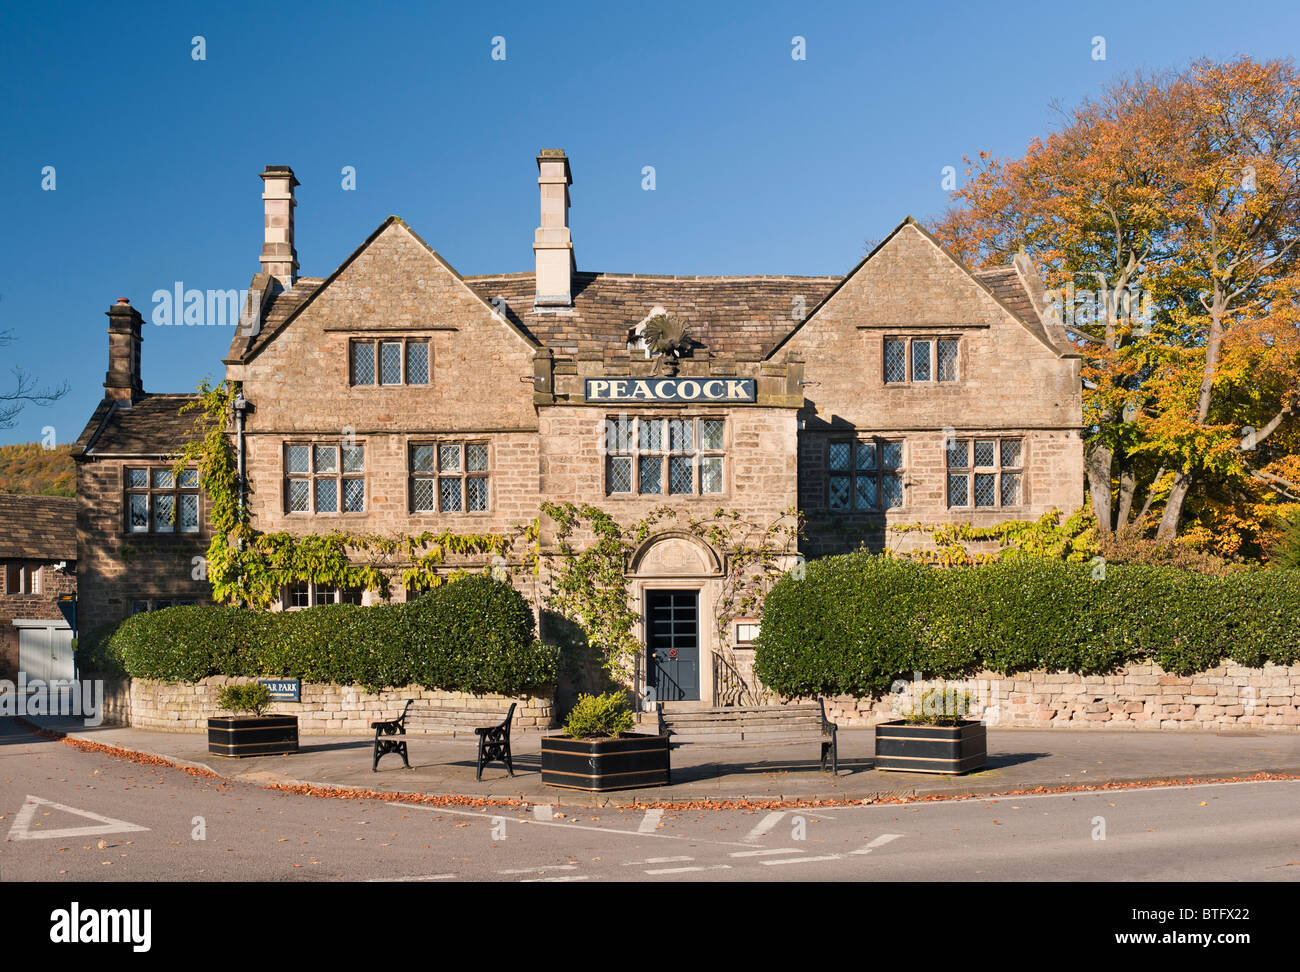 The Peacock Hotel, Rowsley, Derbyshire, England, UK. The Peacock is a small luxury hotel, with sixteen bedrooms, in the Derbyshire Peak District. Stock Photo